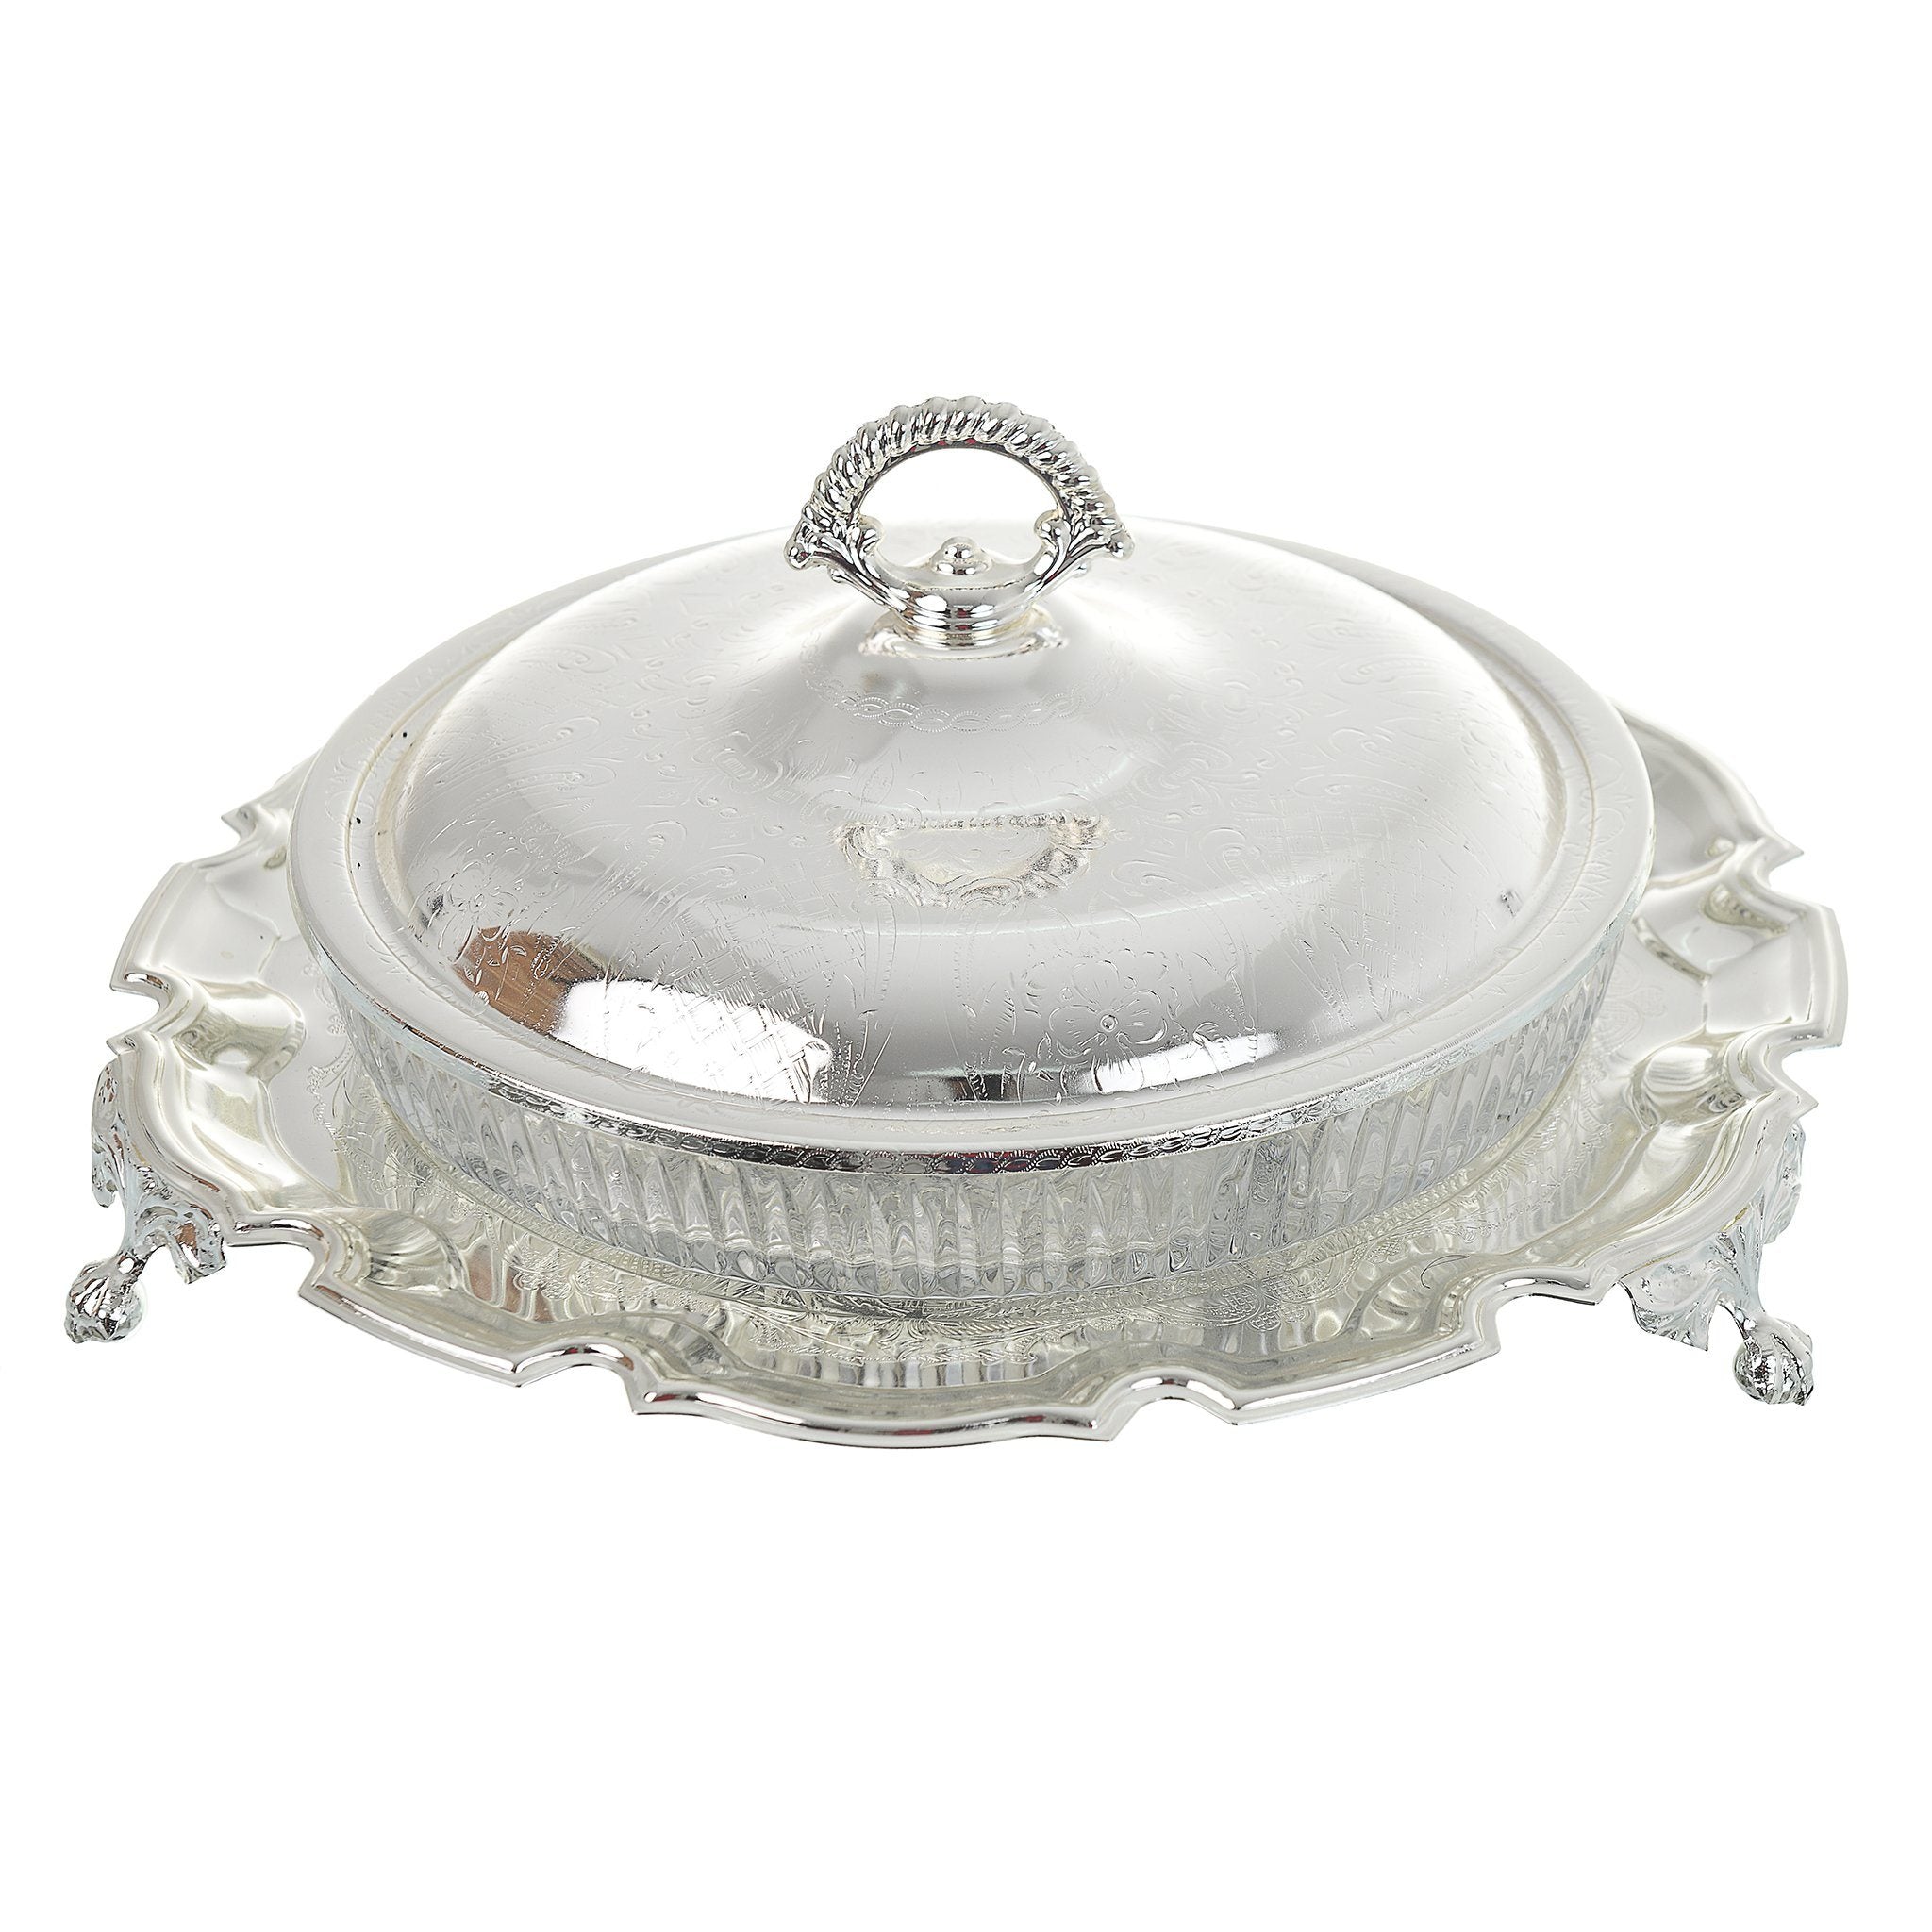 Queen Anne - Round Hors d'oeuvre 5 Parts with Silver Plated Cover & Stand - Silver Plated Metal & Glass - 25cm - 26000445